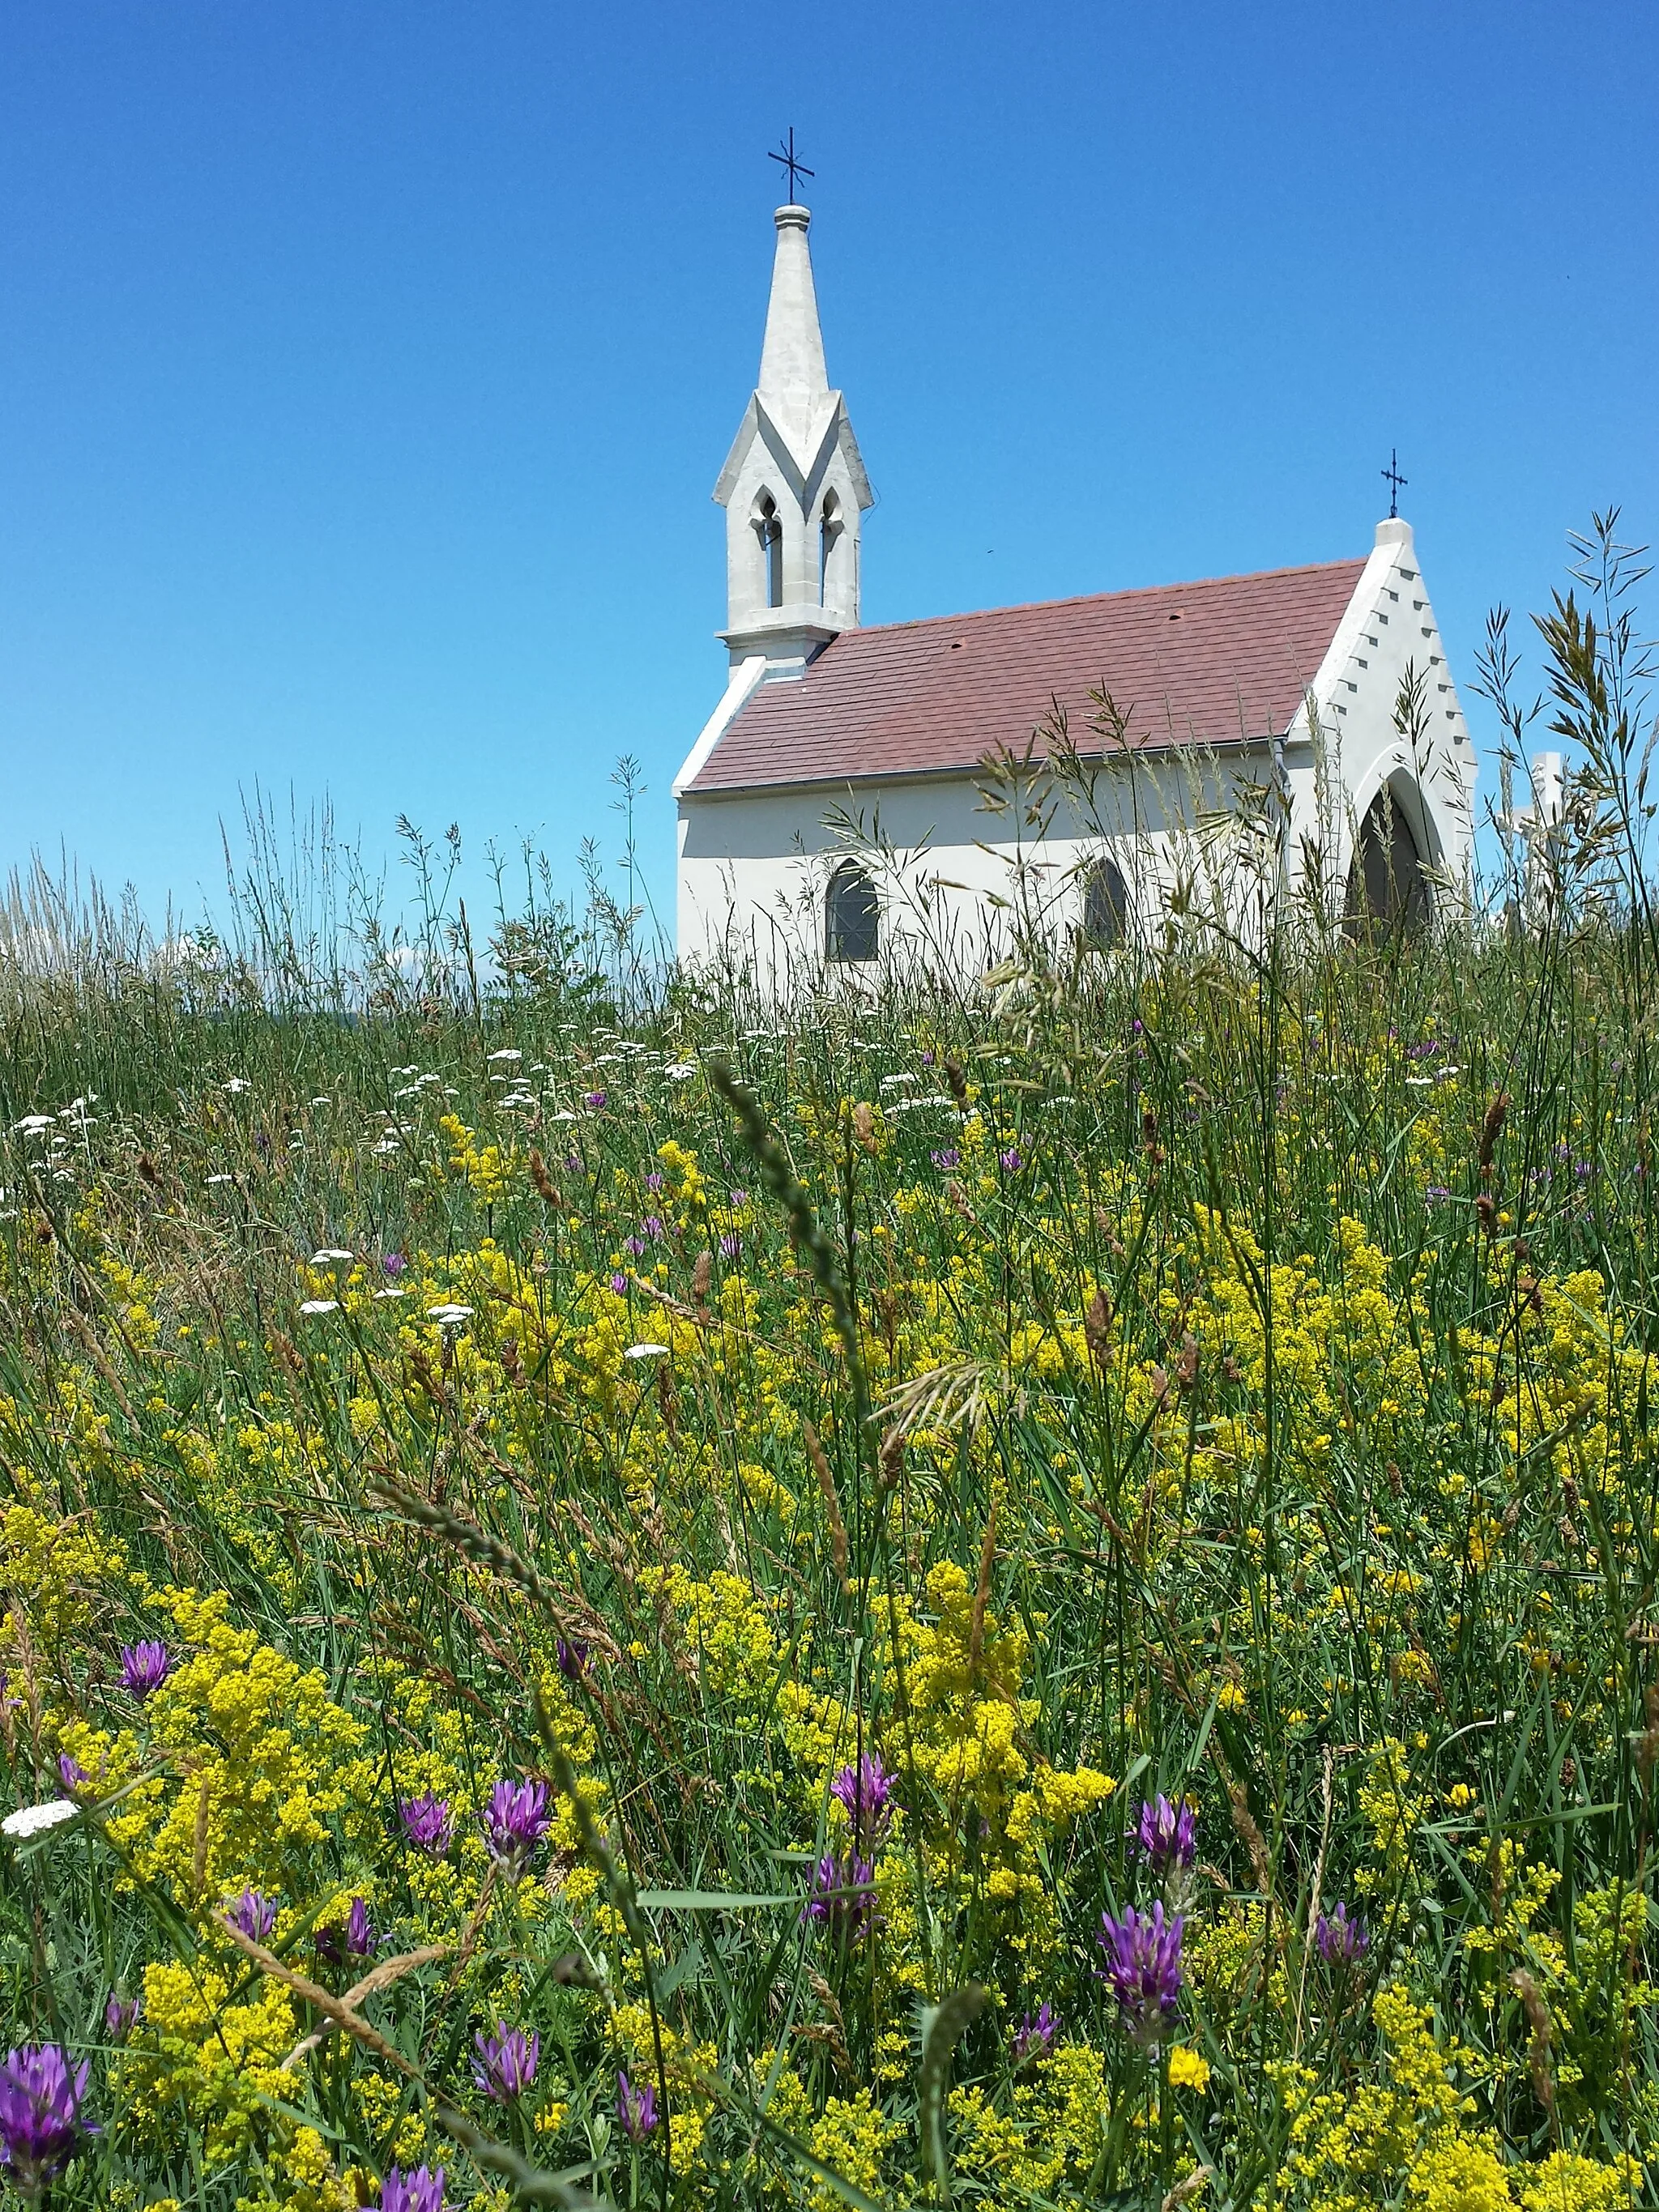 Photo showing: Kalvarienberg in Neusiedl am See, district Neusiedl am See, Burgenland, Austria - ca. 160 m a.s.l.
Dry grassland and chapel